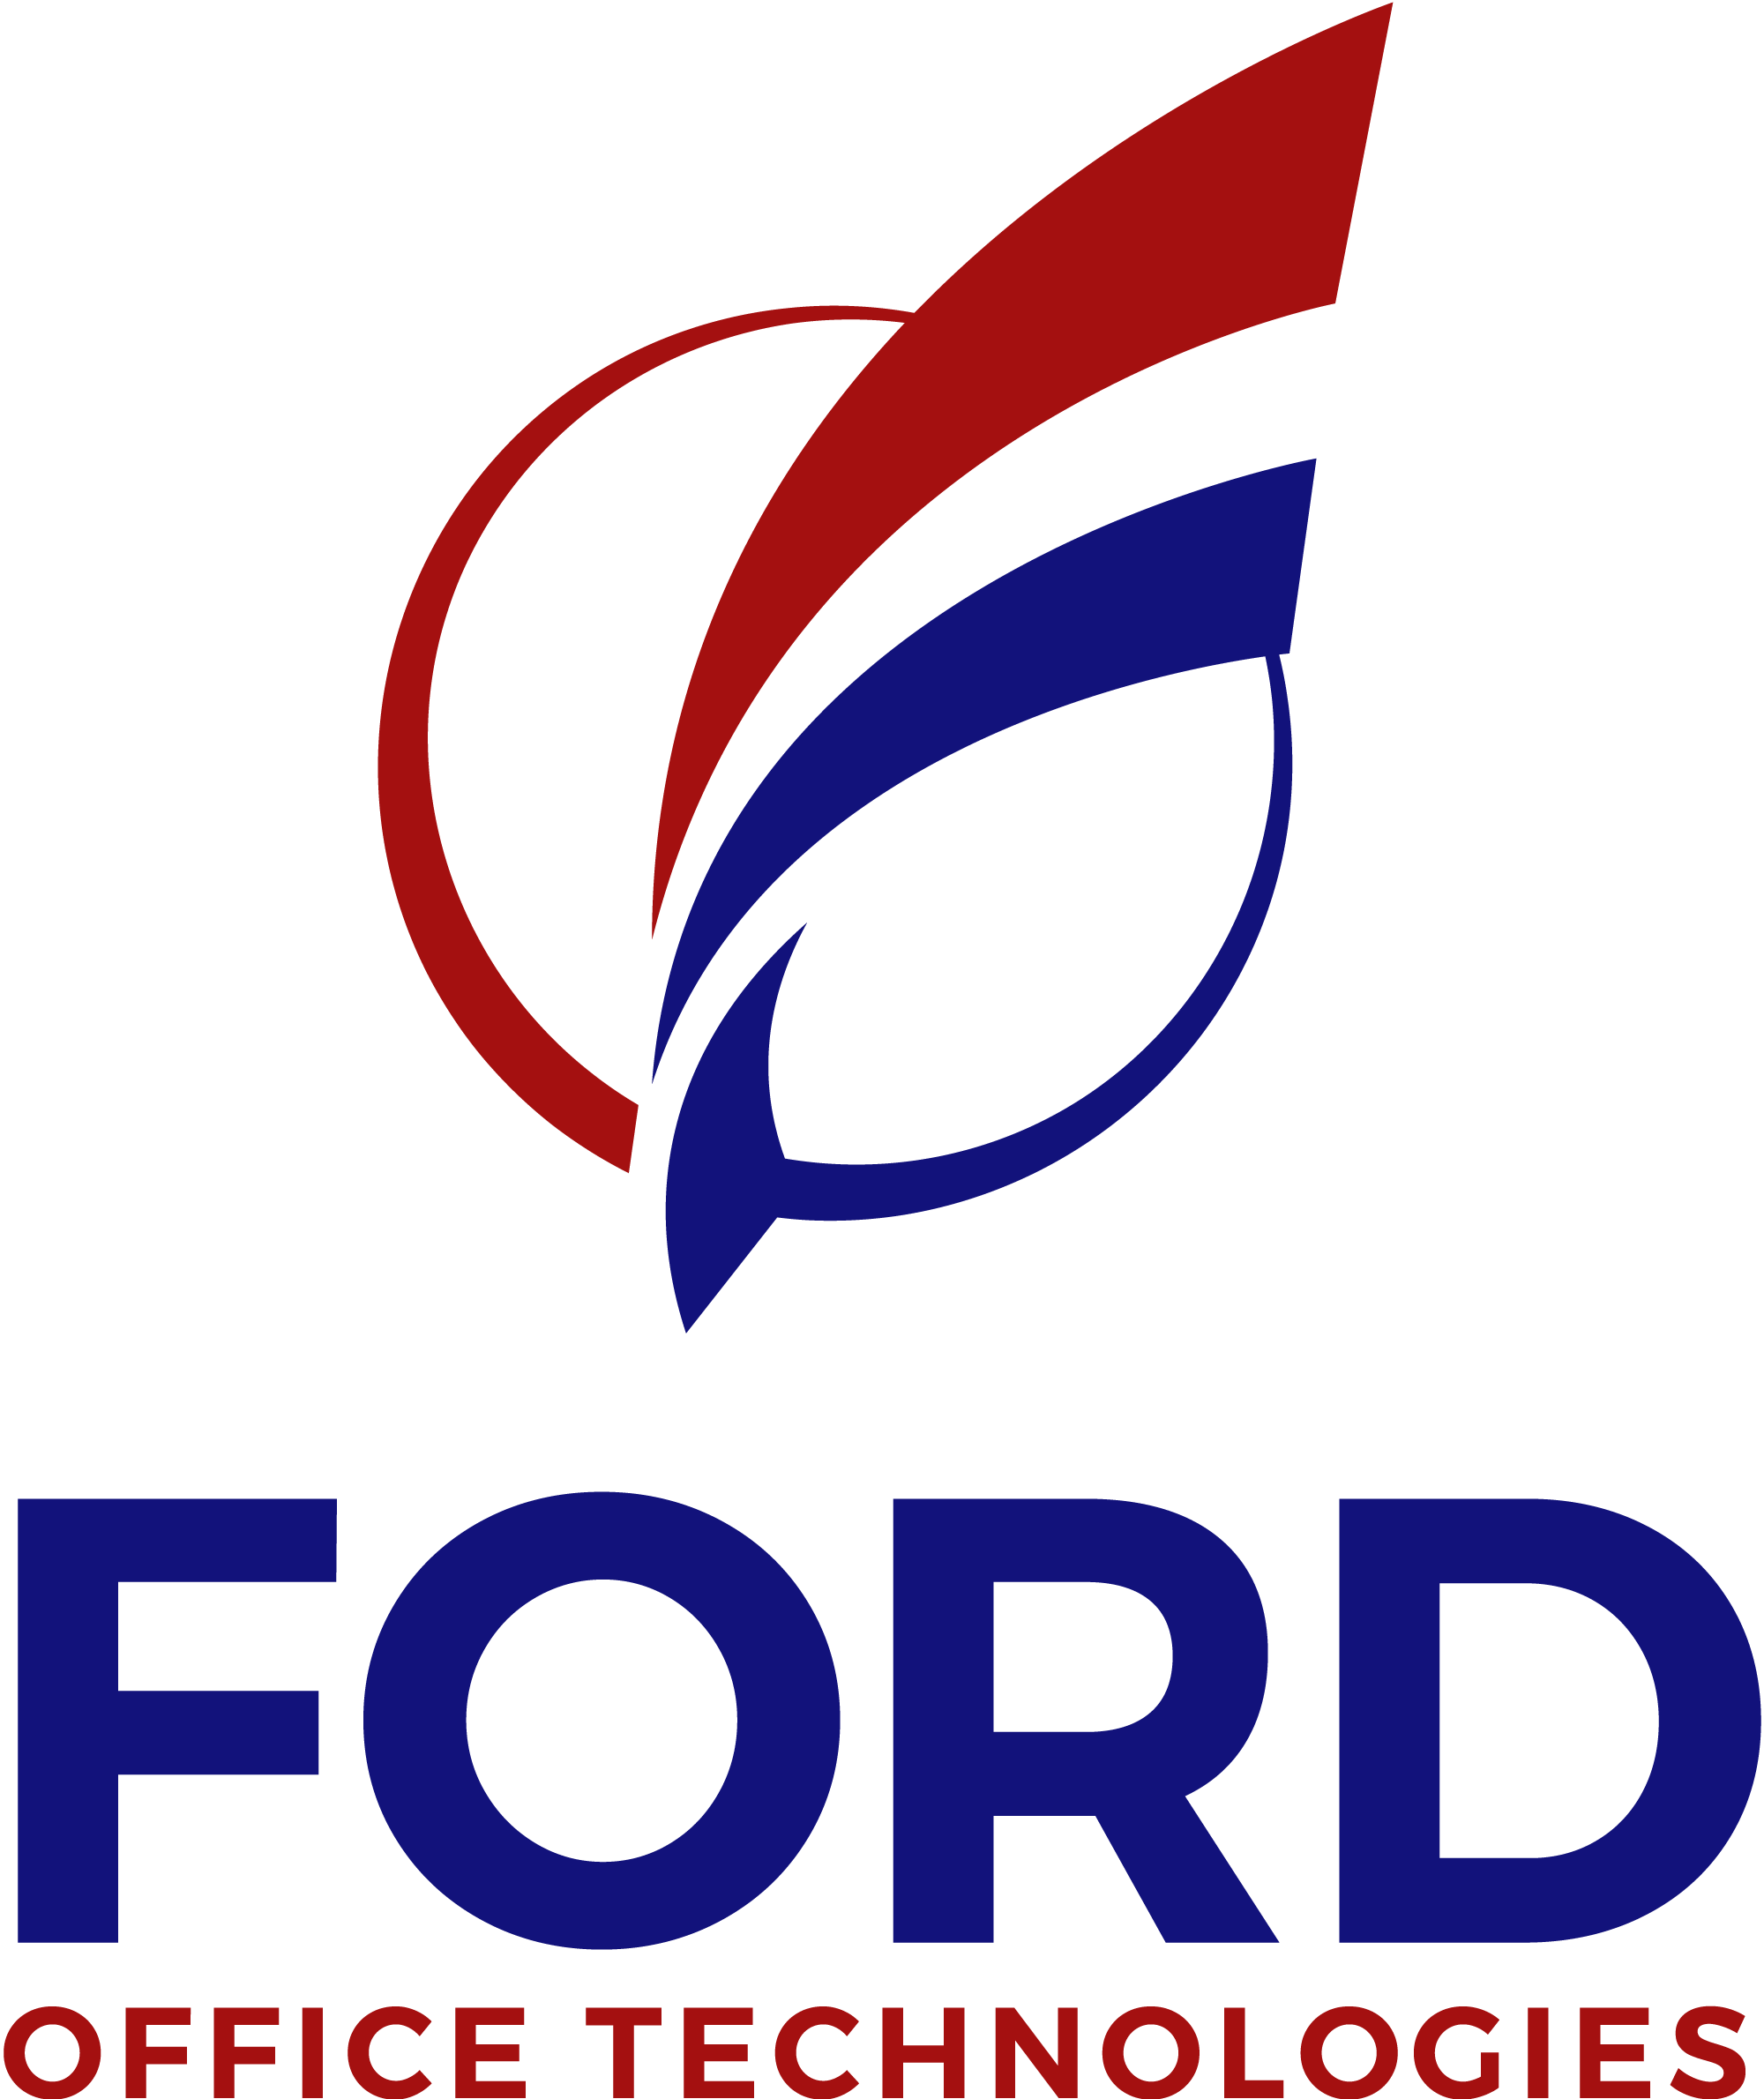 Ford Office Technologies logo